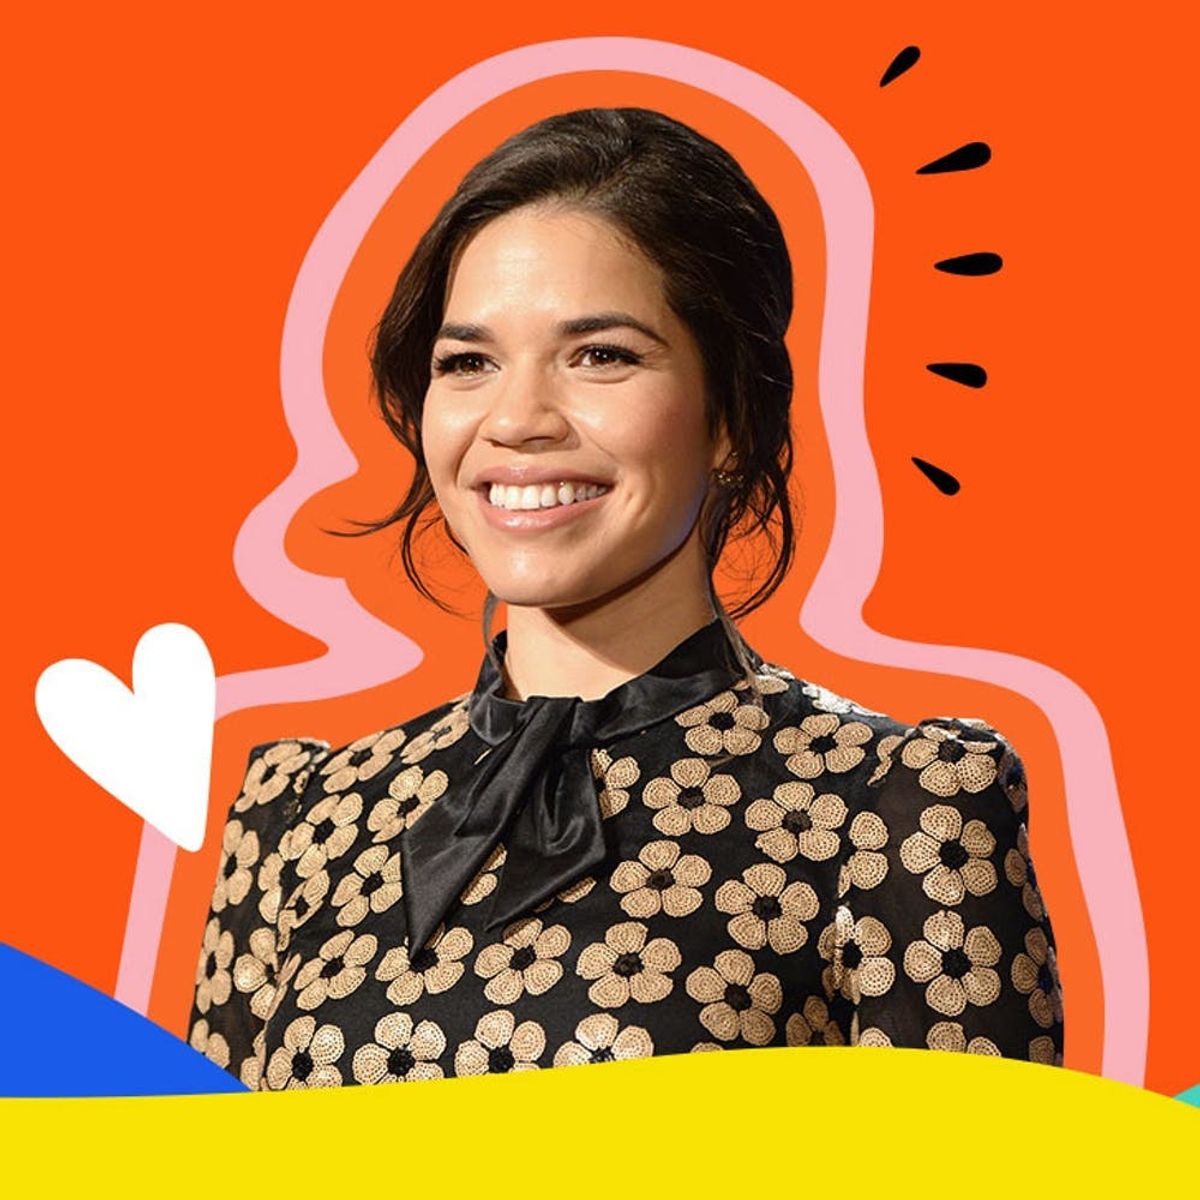 America Ferrera Stakes Her Claim As an Activist With Many Hats